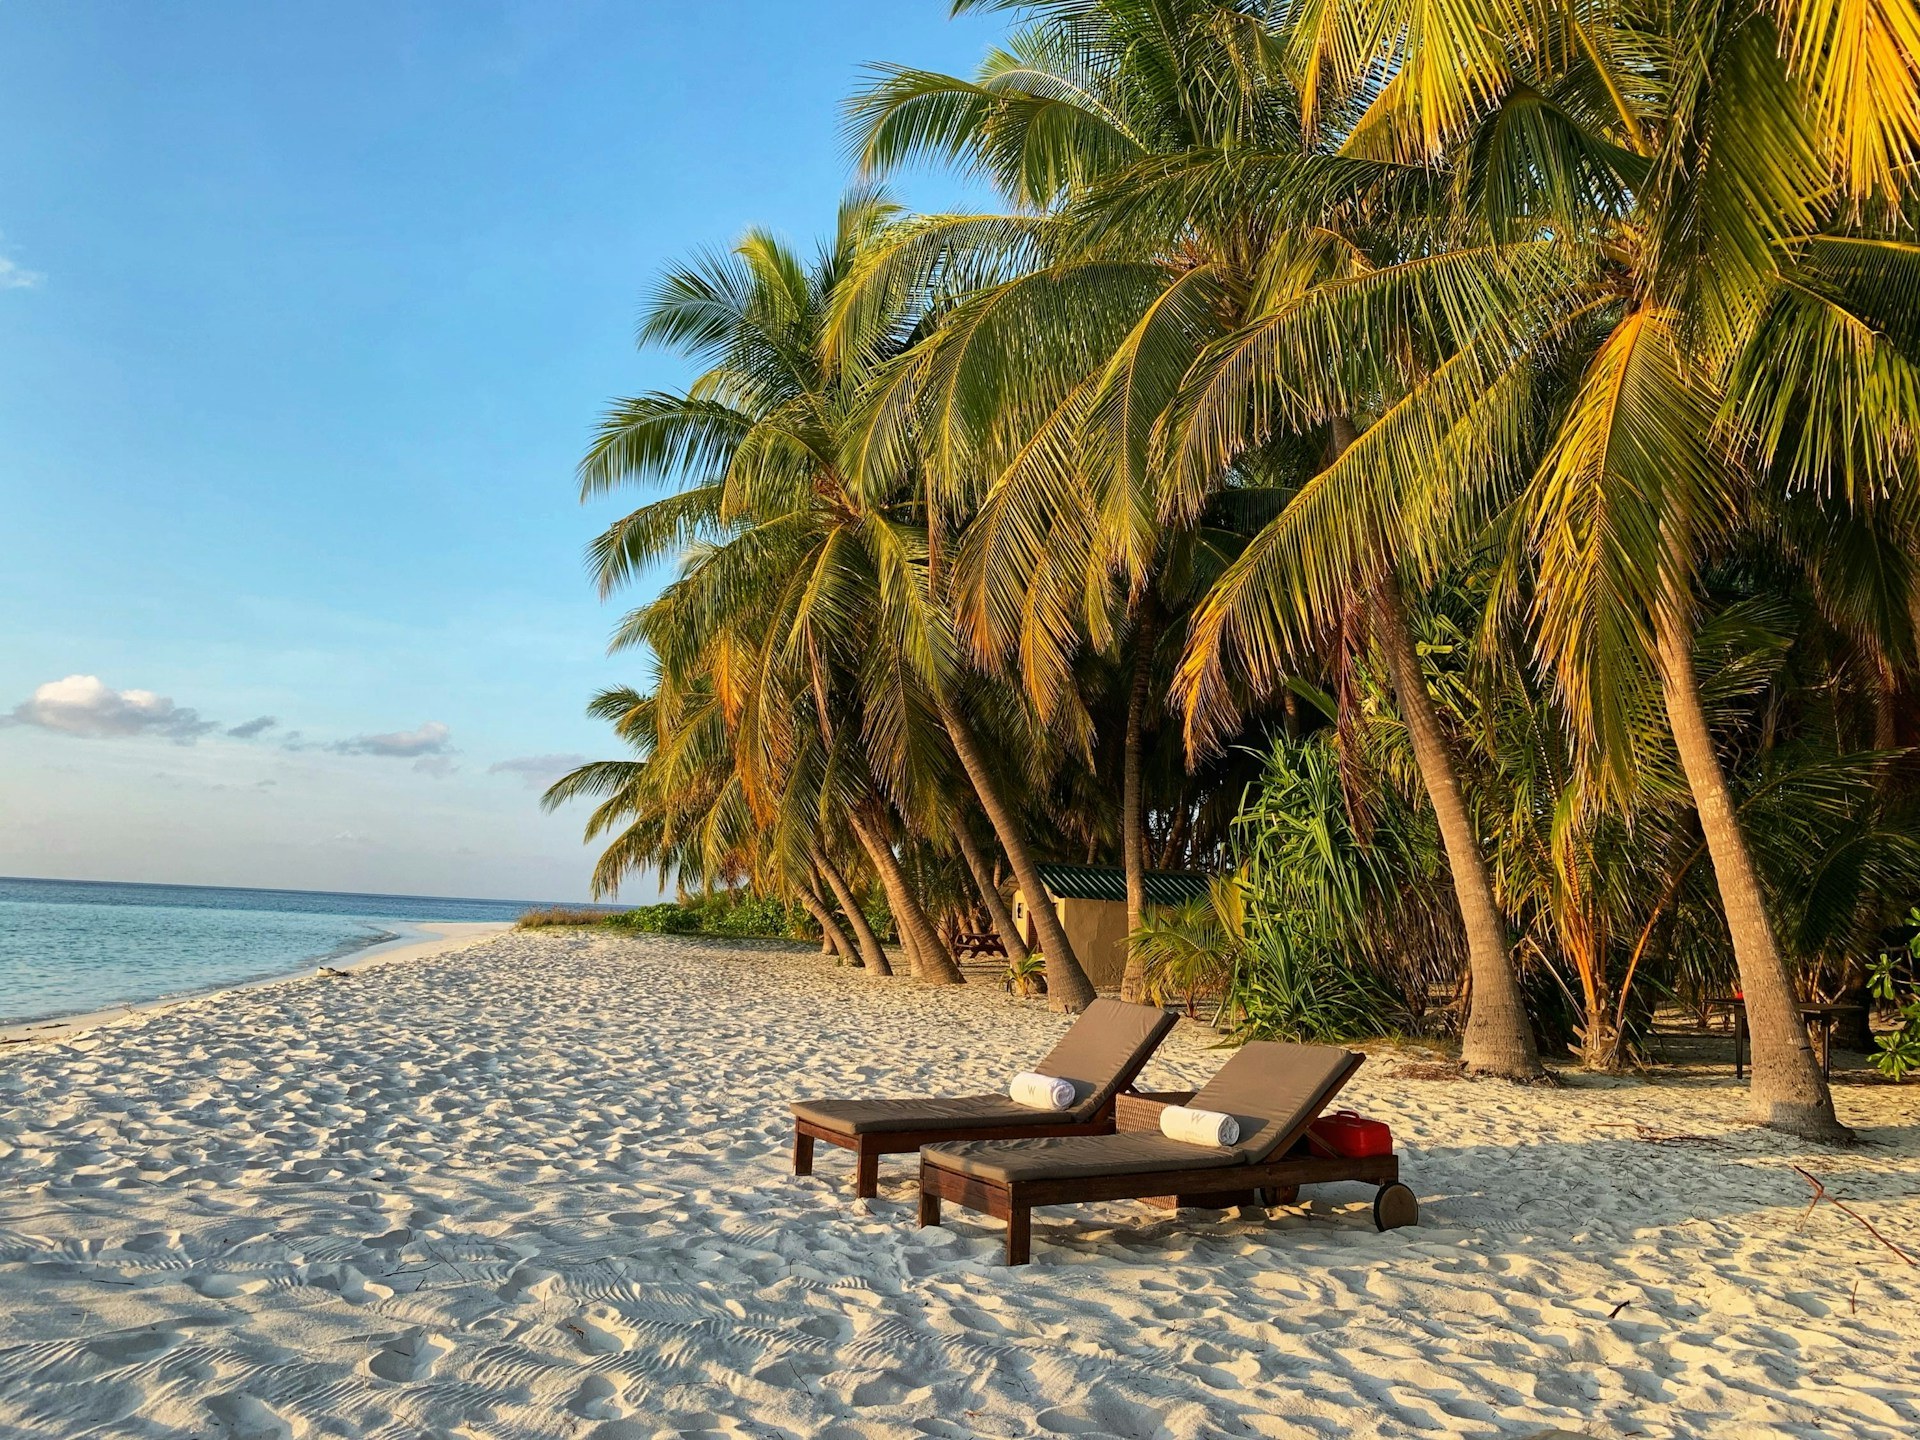 Two wooden lounge chairs sit together on a secluded beach, fresh towels rolled and ready for their occupants.